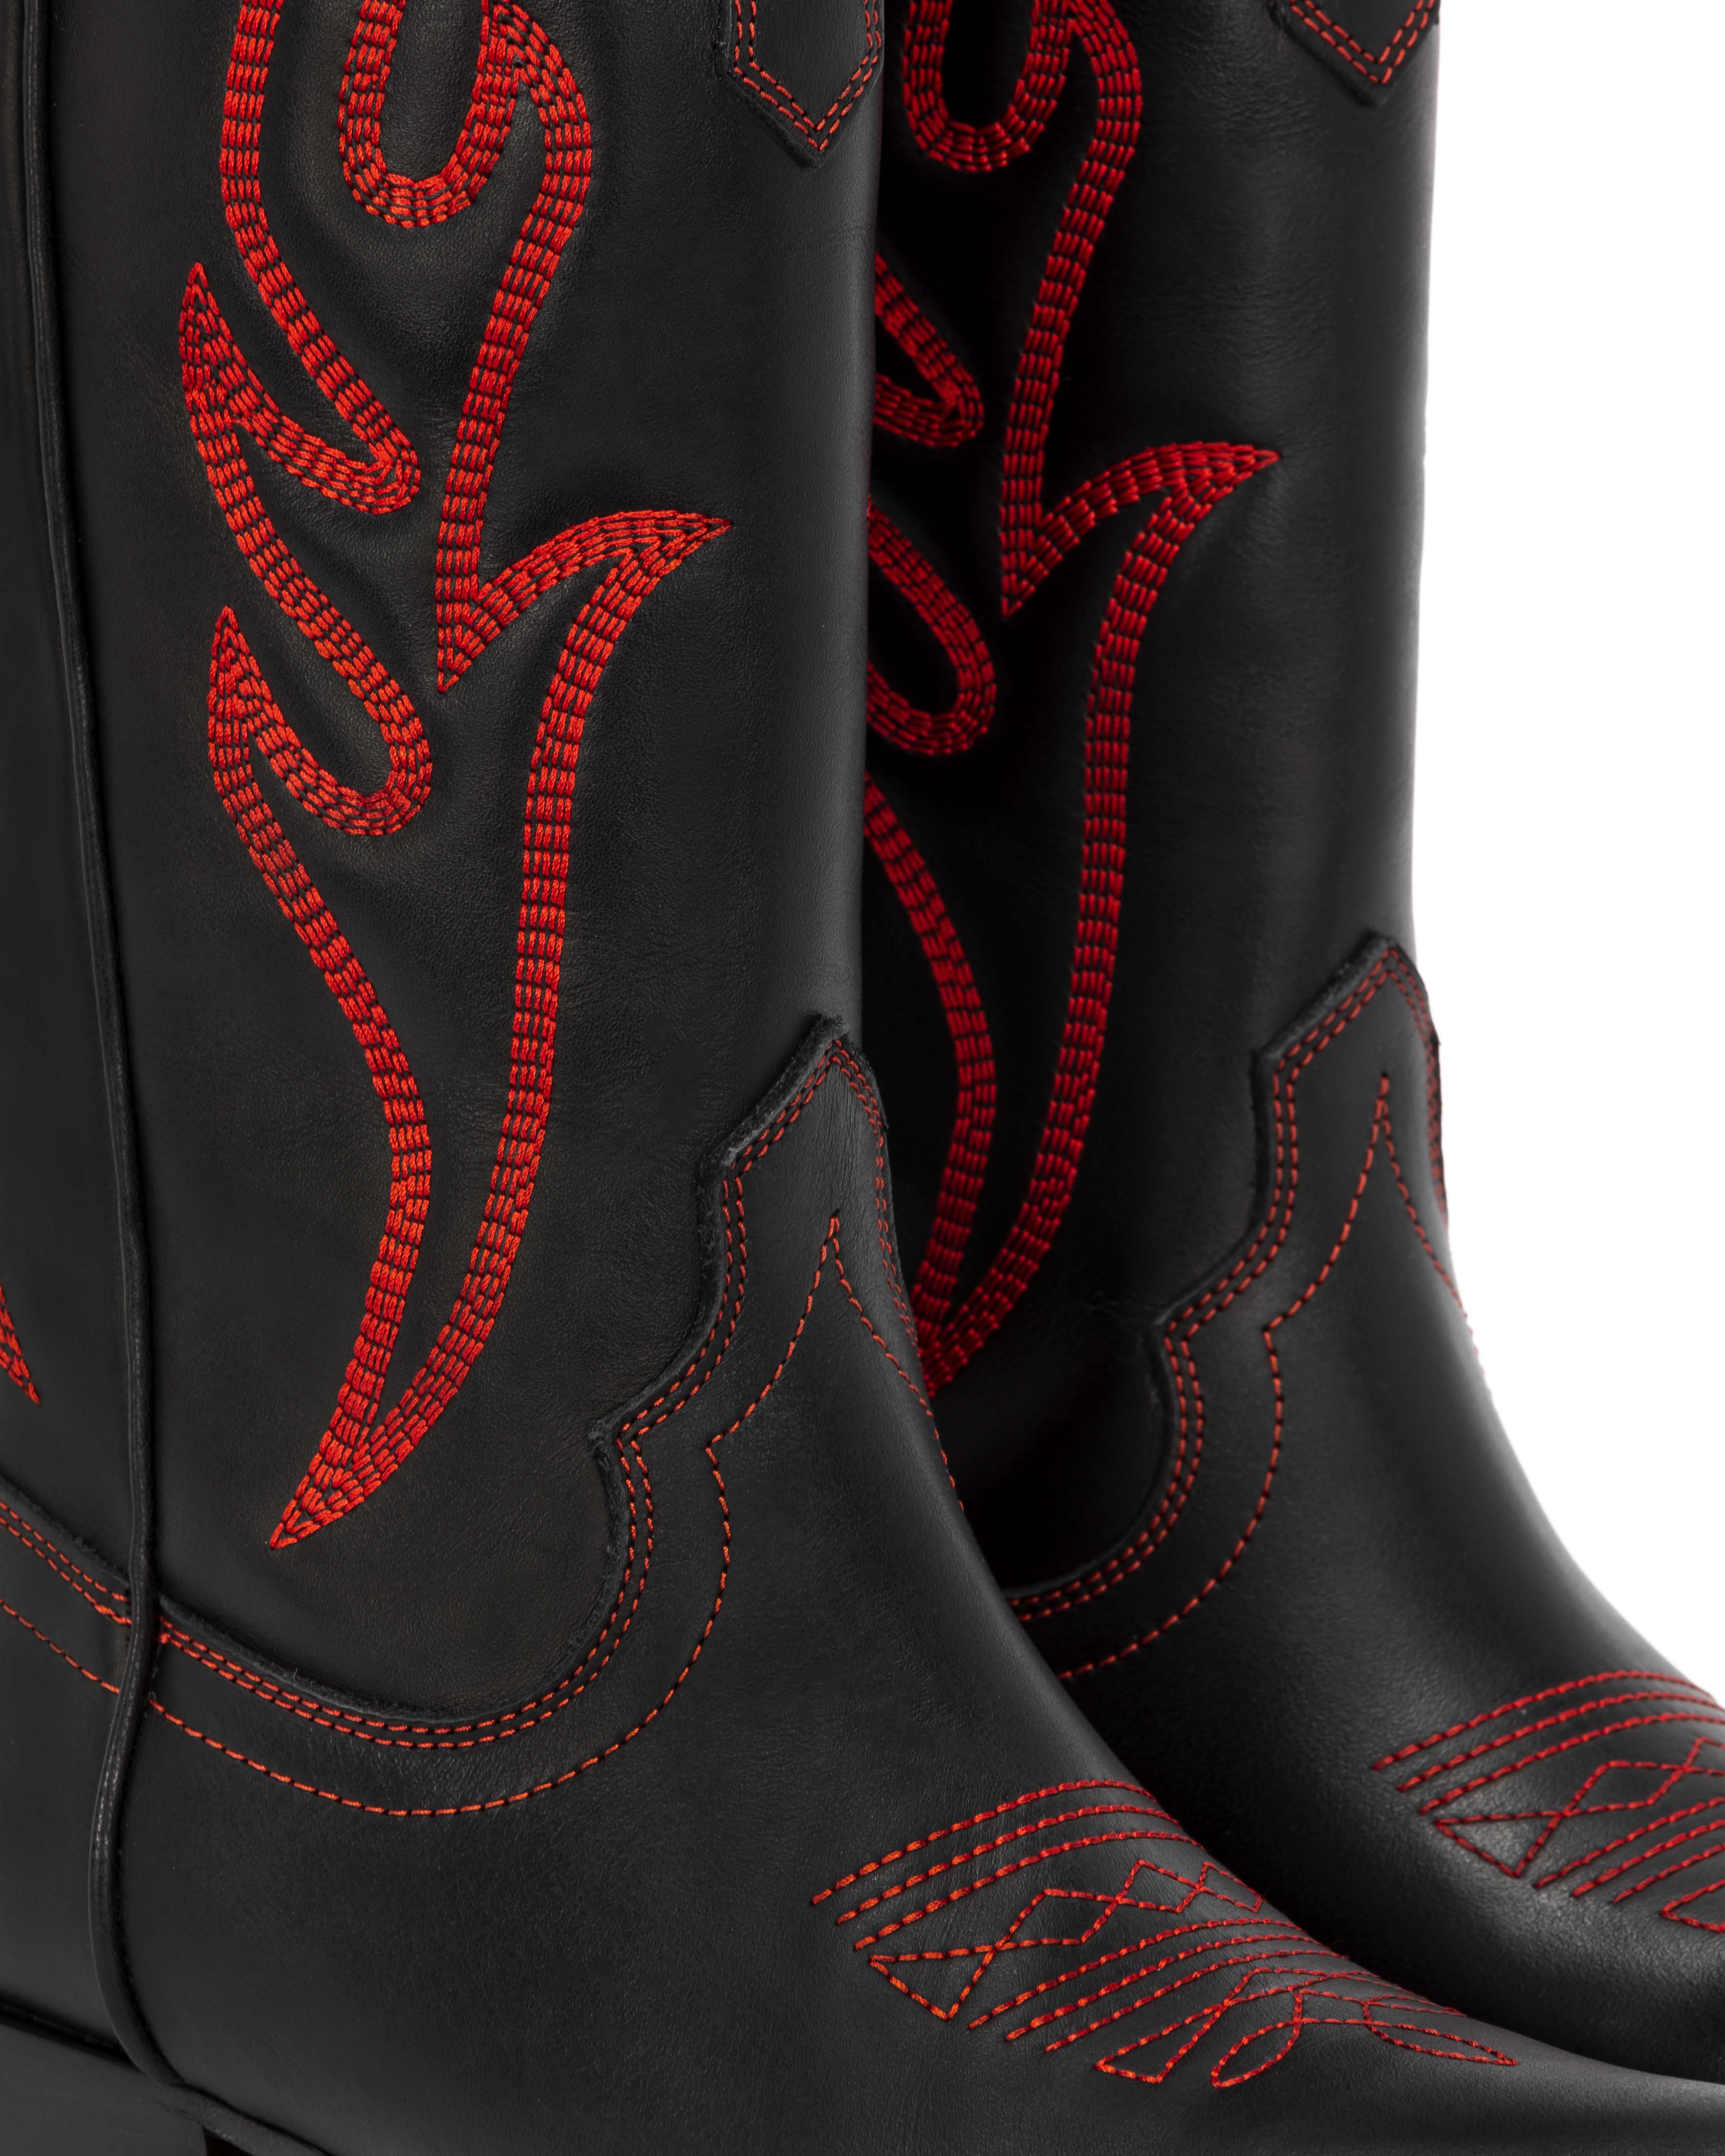 Woman Cowboy Boots in Black Calfskin with Red Embroidery, SANTA FE